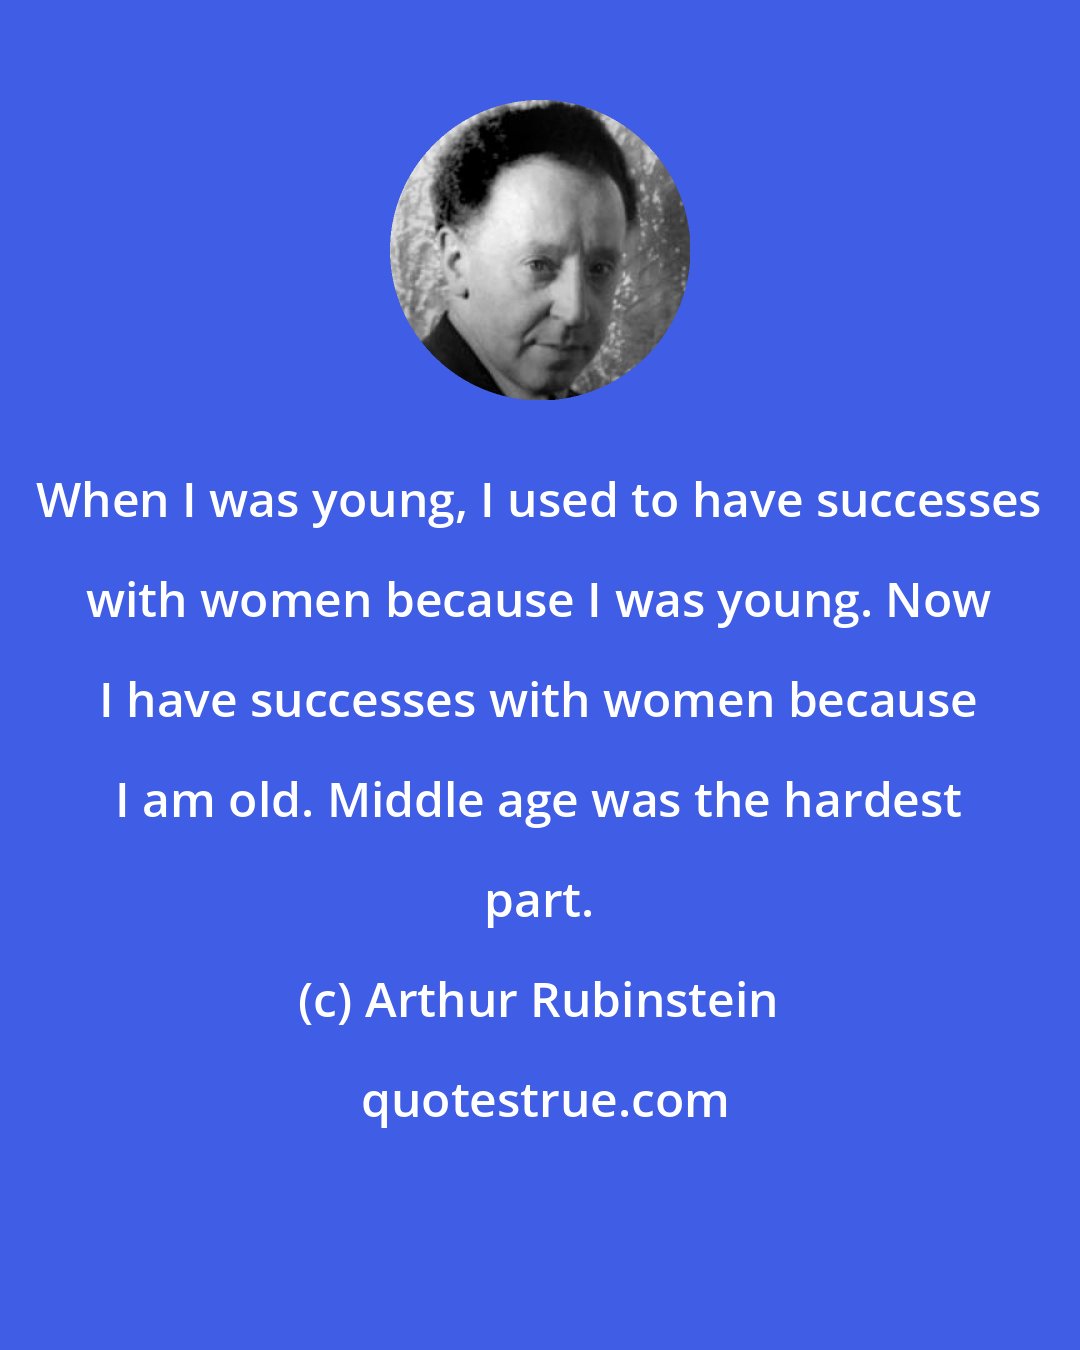 Arthur Rubinstein: When I was young, I used to have successes with women because I was young. Now I have successes with women because I am old. Middle age was the hardest part.